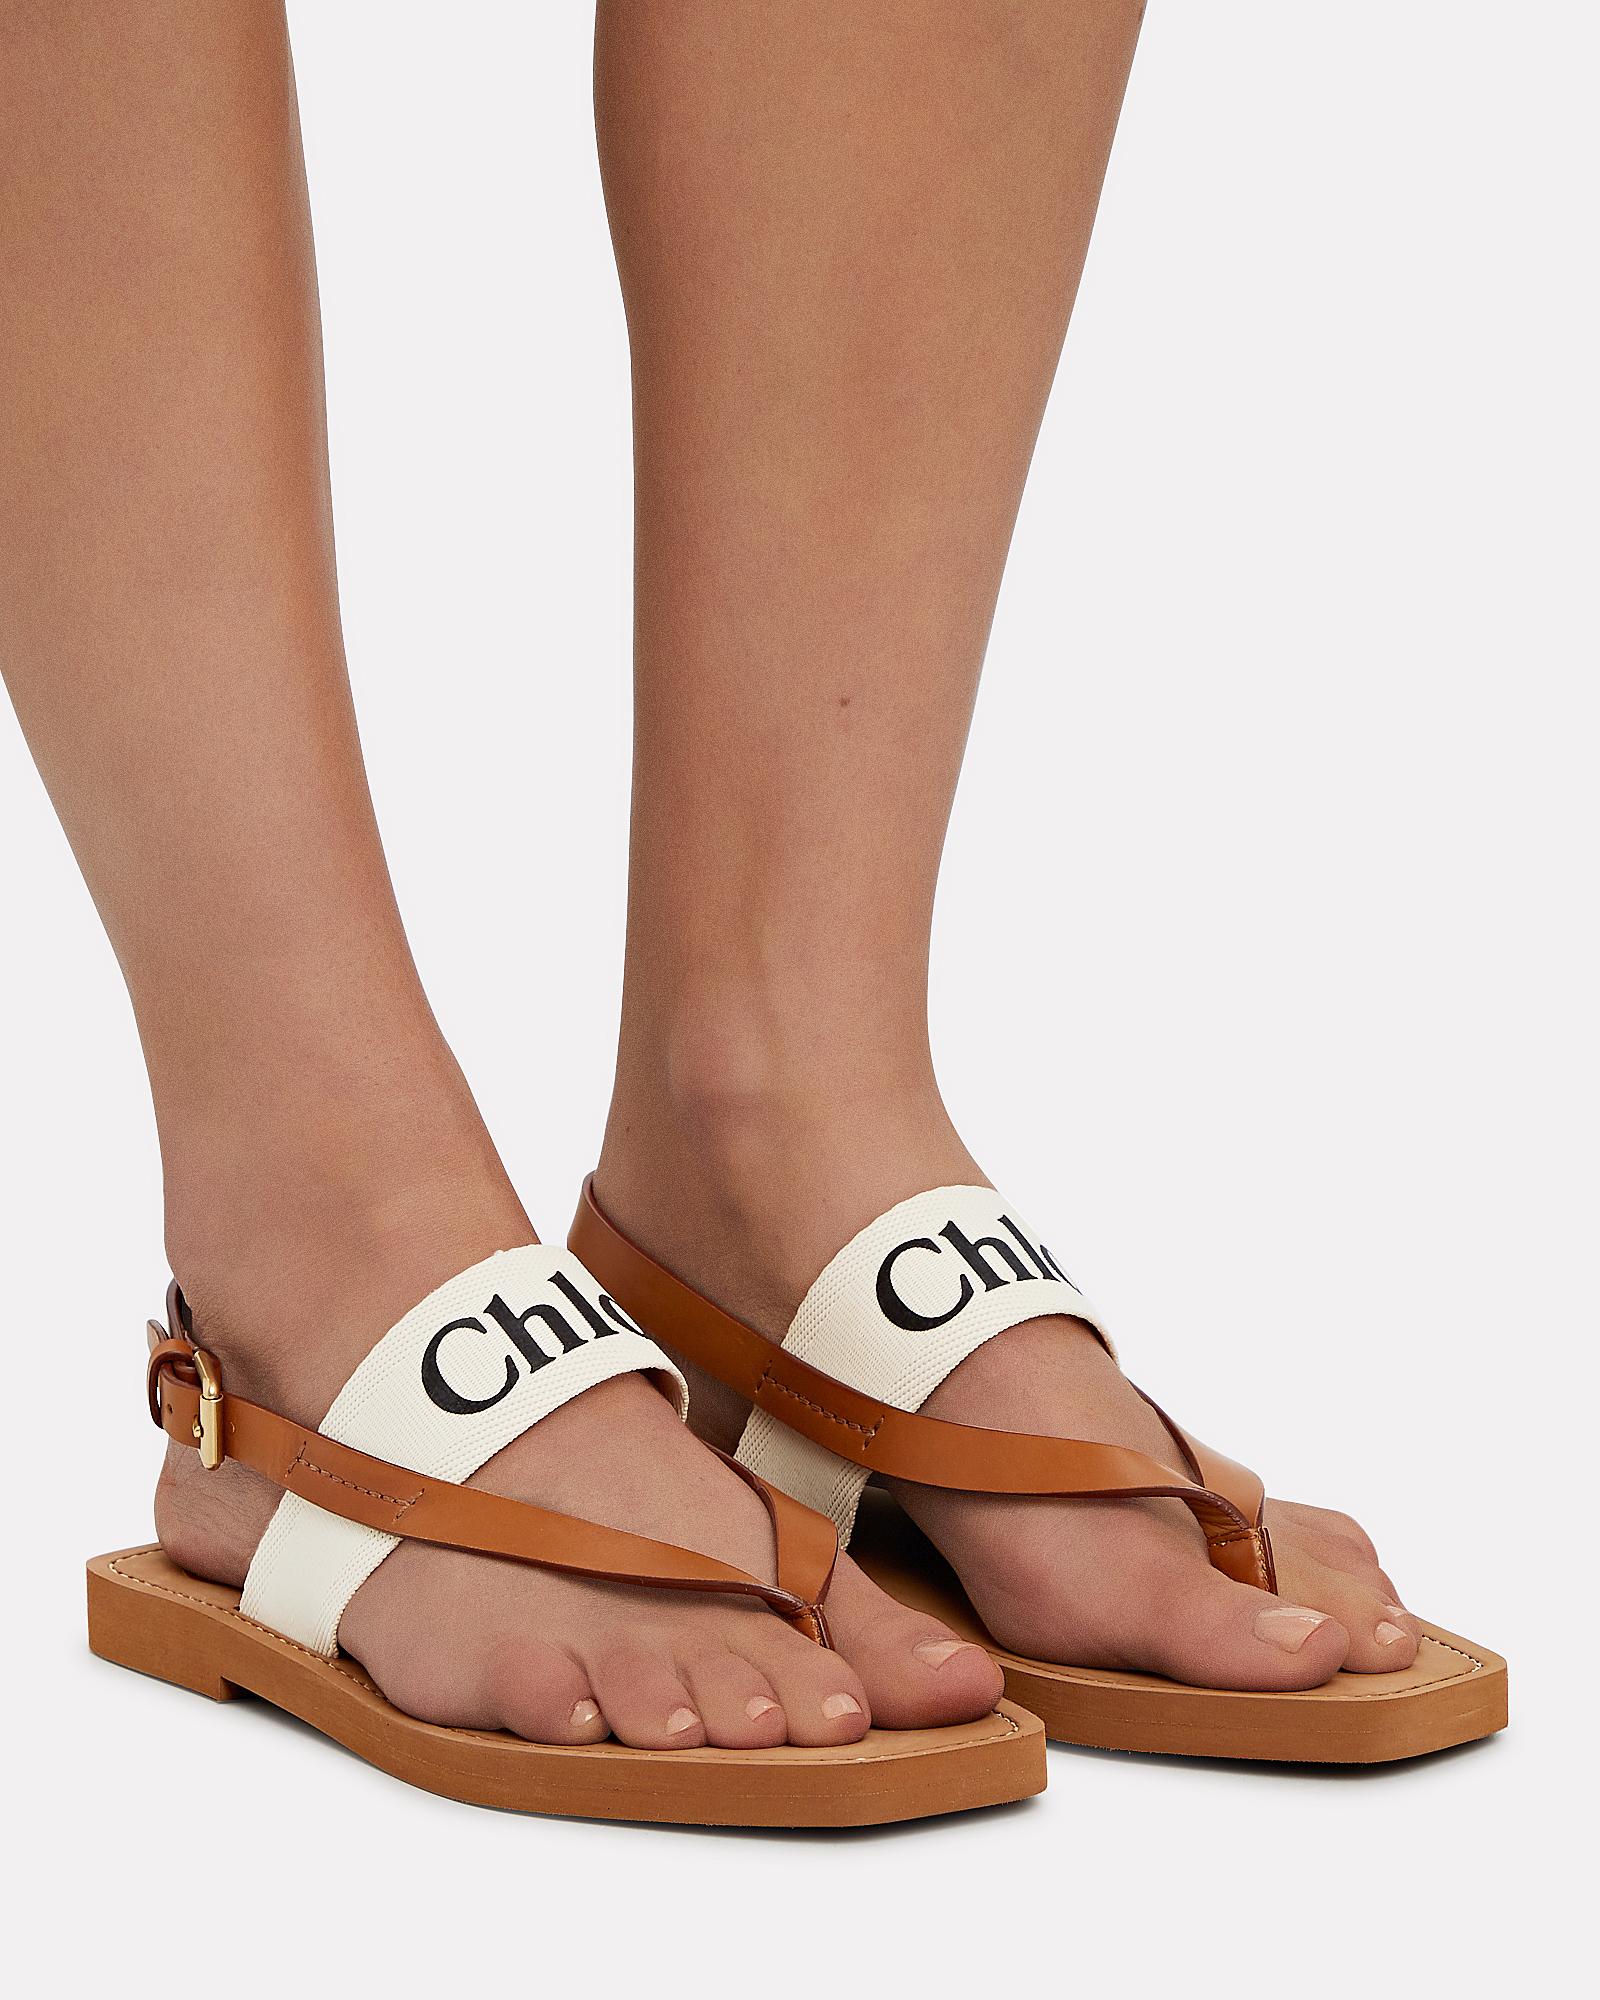 Chloé Woody Flat Leather Thong Sandals in Brown | Lyst